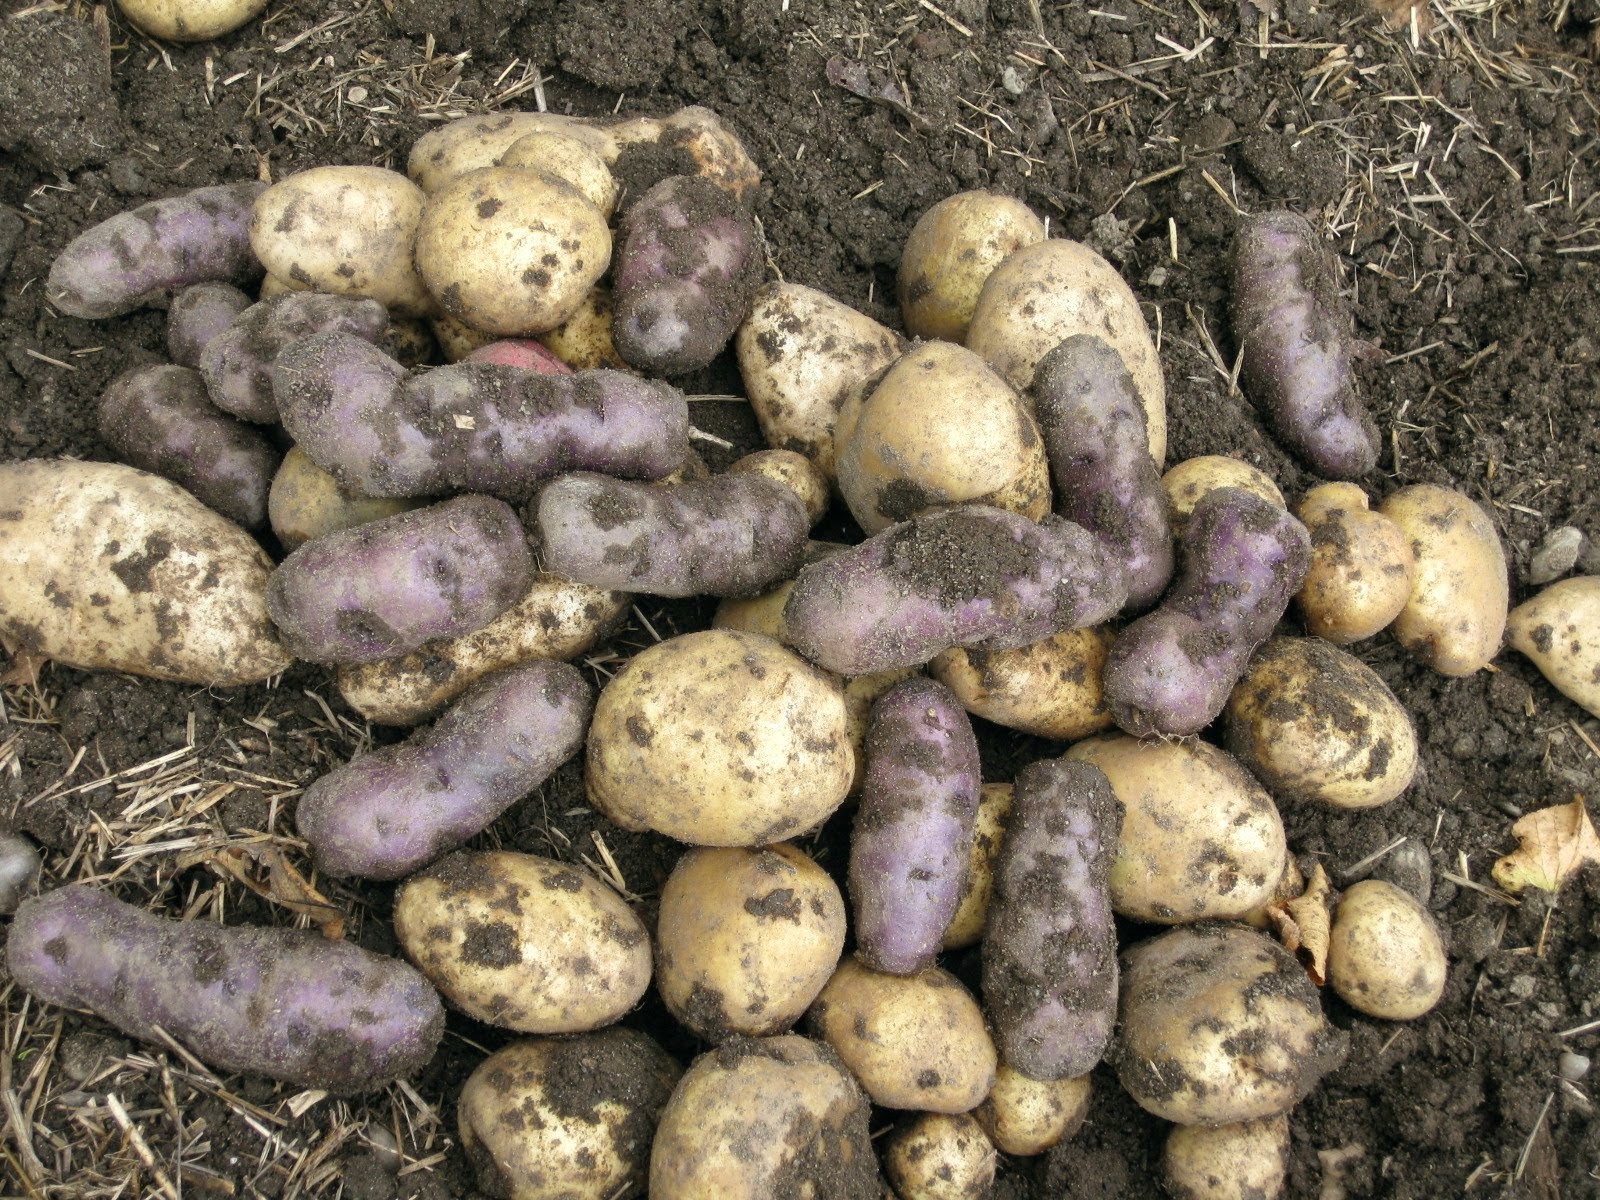 What are some tips on growing and harvesting potatoes?